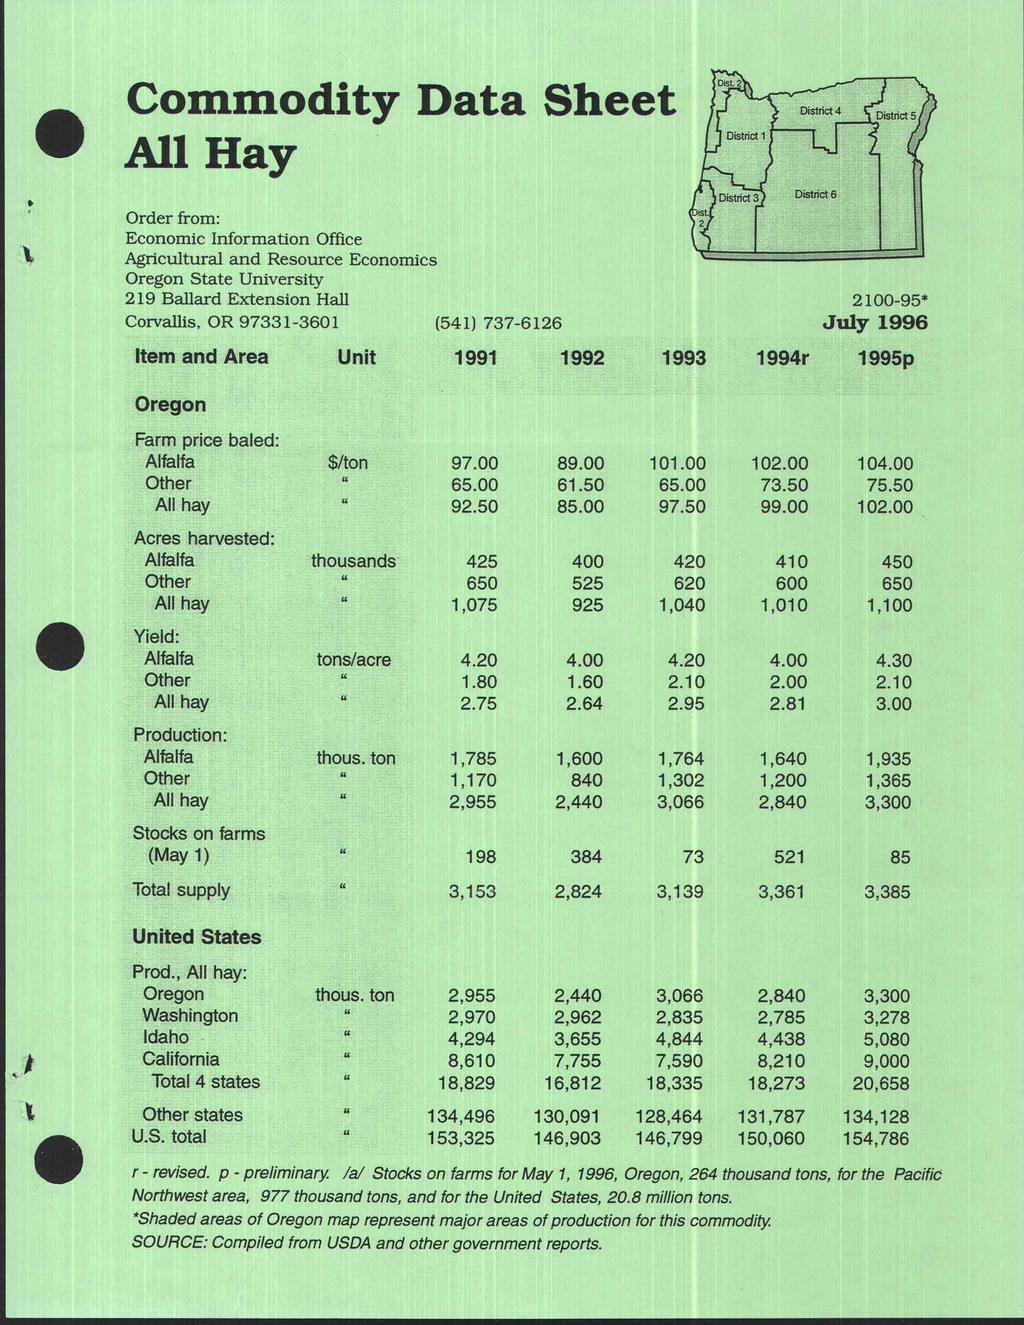 : Commodity Data Sheet All Hay Order from: Economic Information Office Agricultural and Resource Economics Oregon State University 29 Ballard Extension Hall Corvallis, OR 9733 360 Item and Area